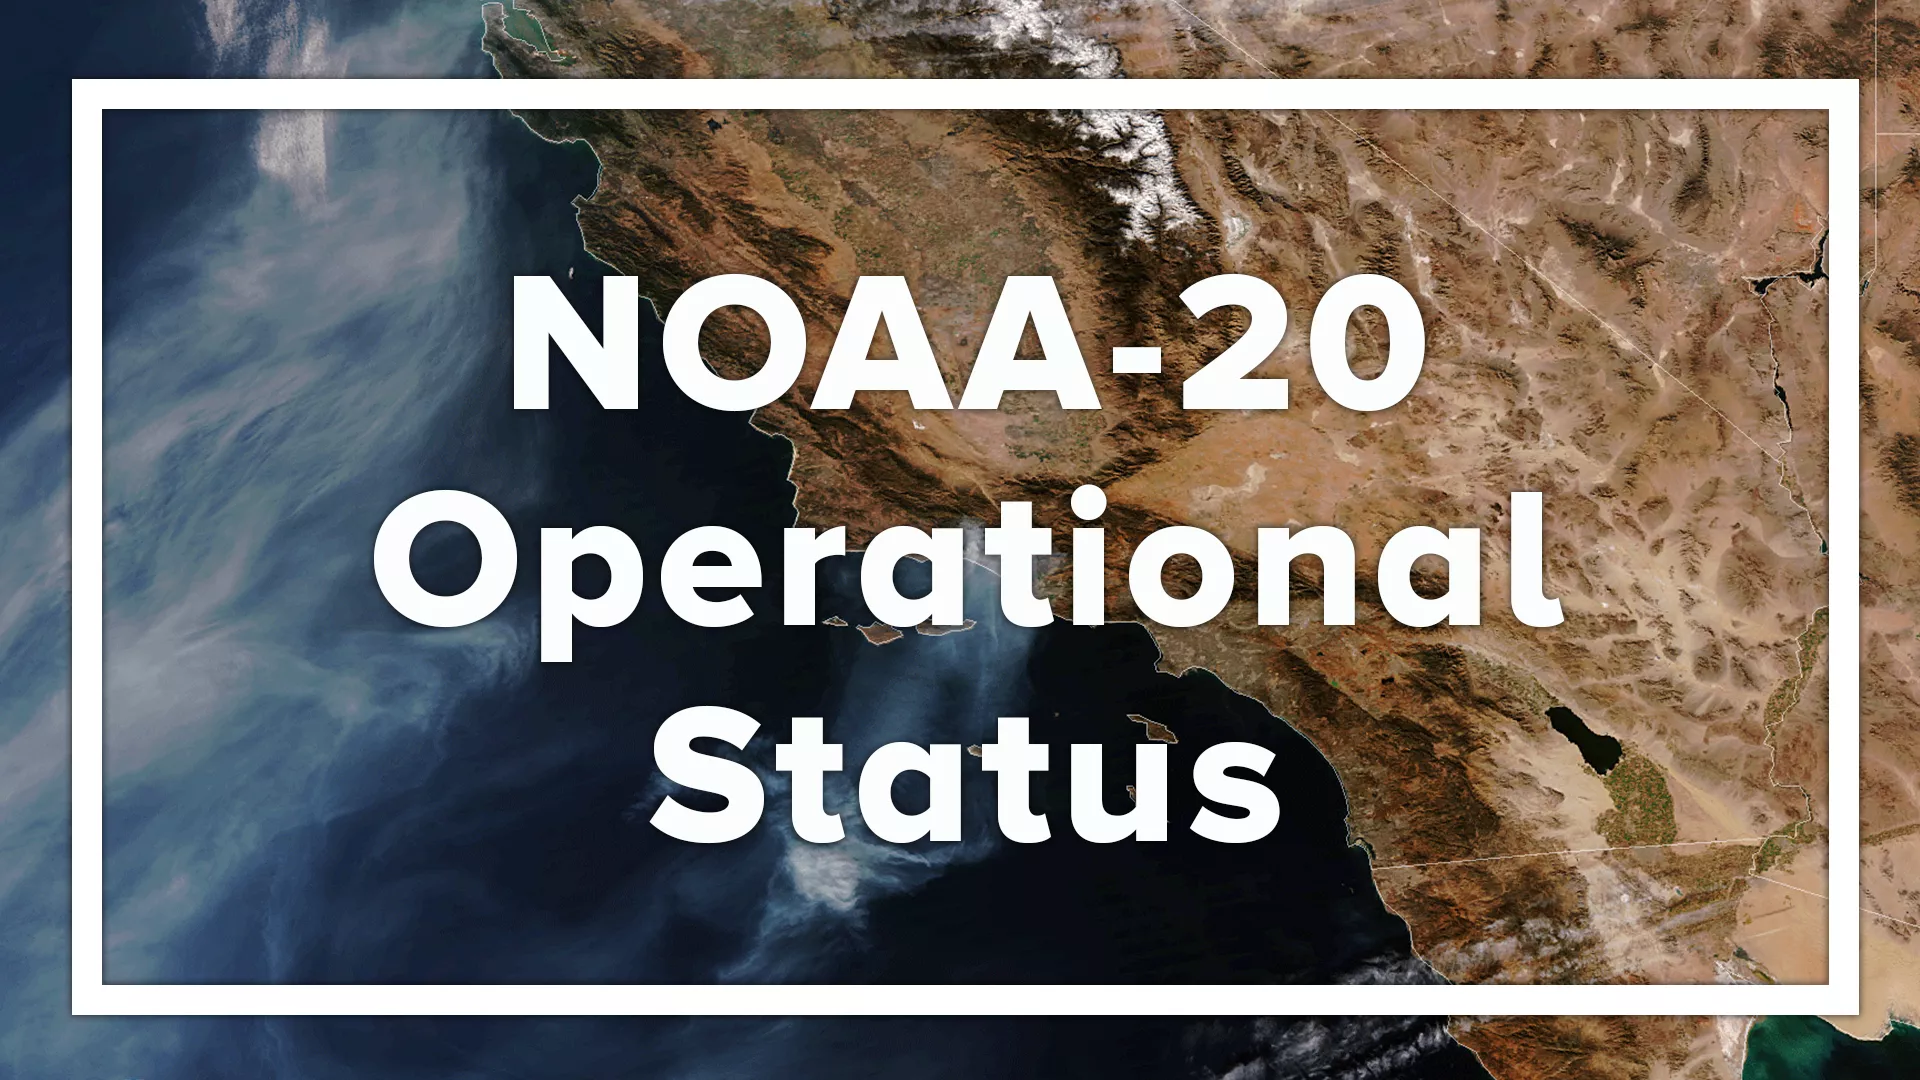 Image with text; NOAA Operational Status